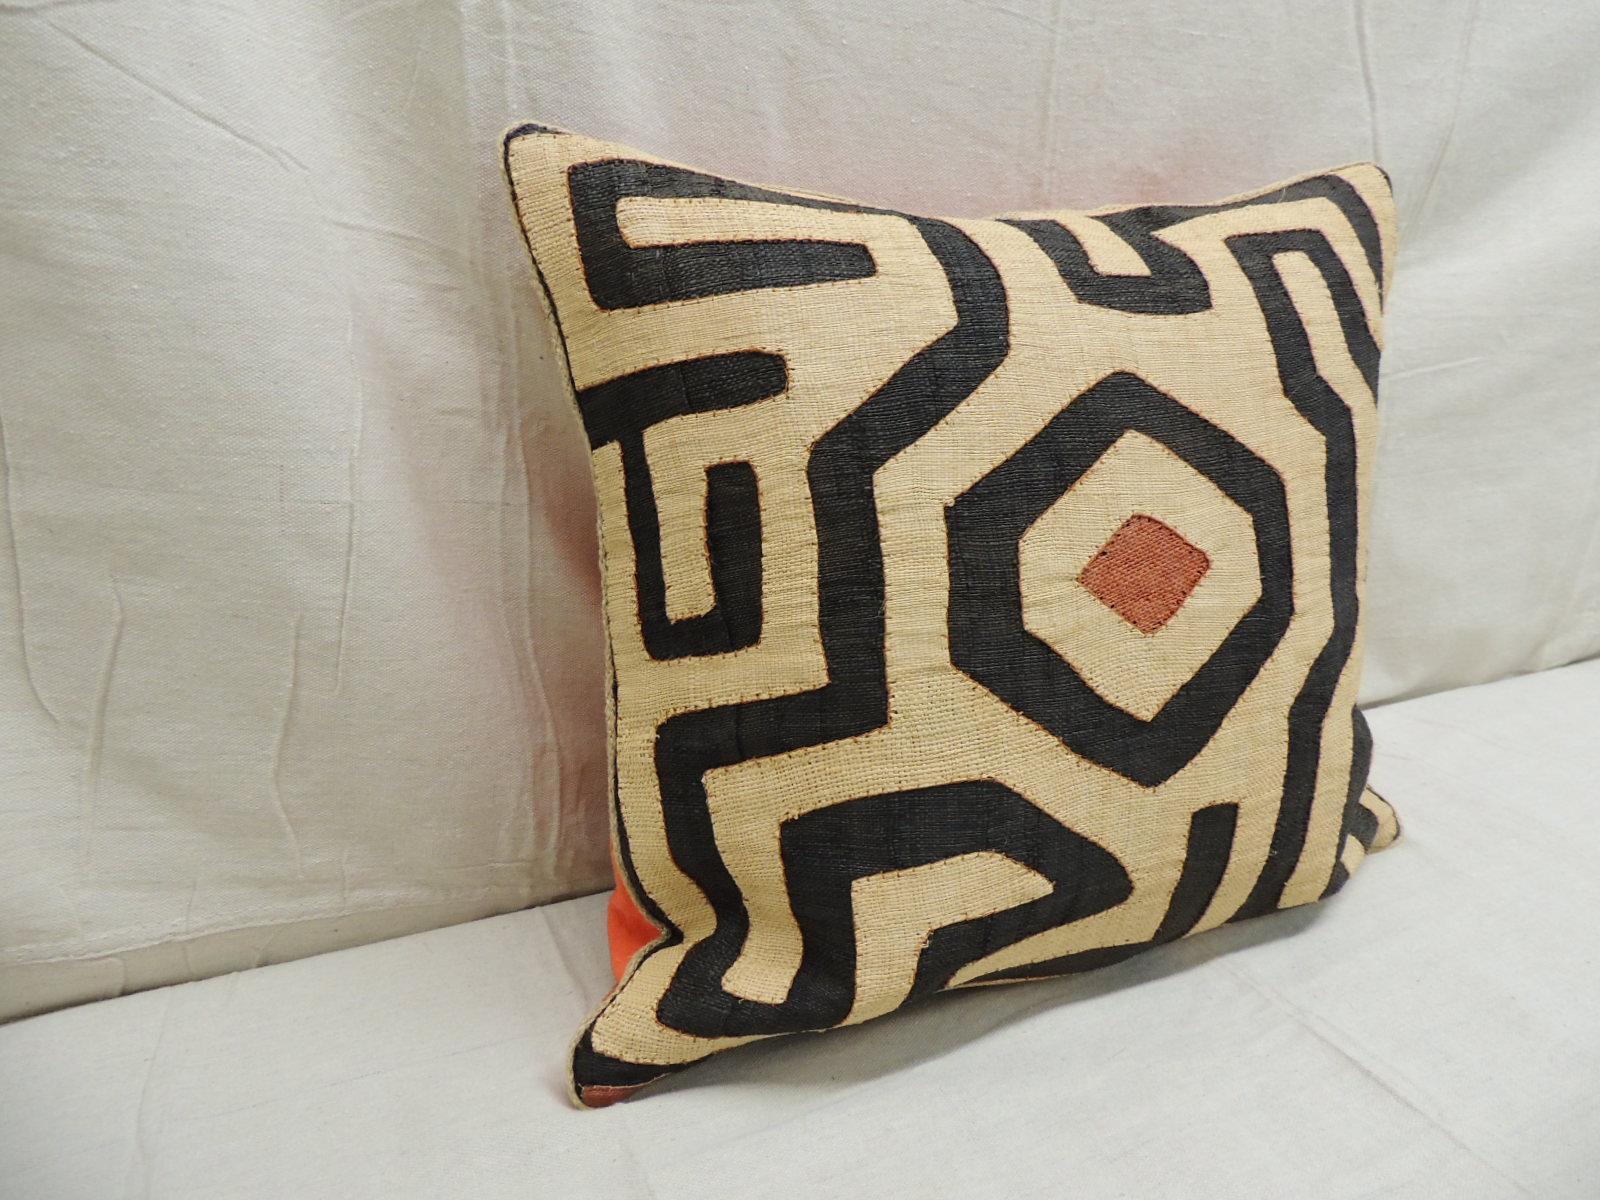 Tribal Vintage Kuba Tan and Black Handwoven Patchwork Square African Decorative Pillow